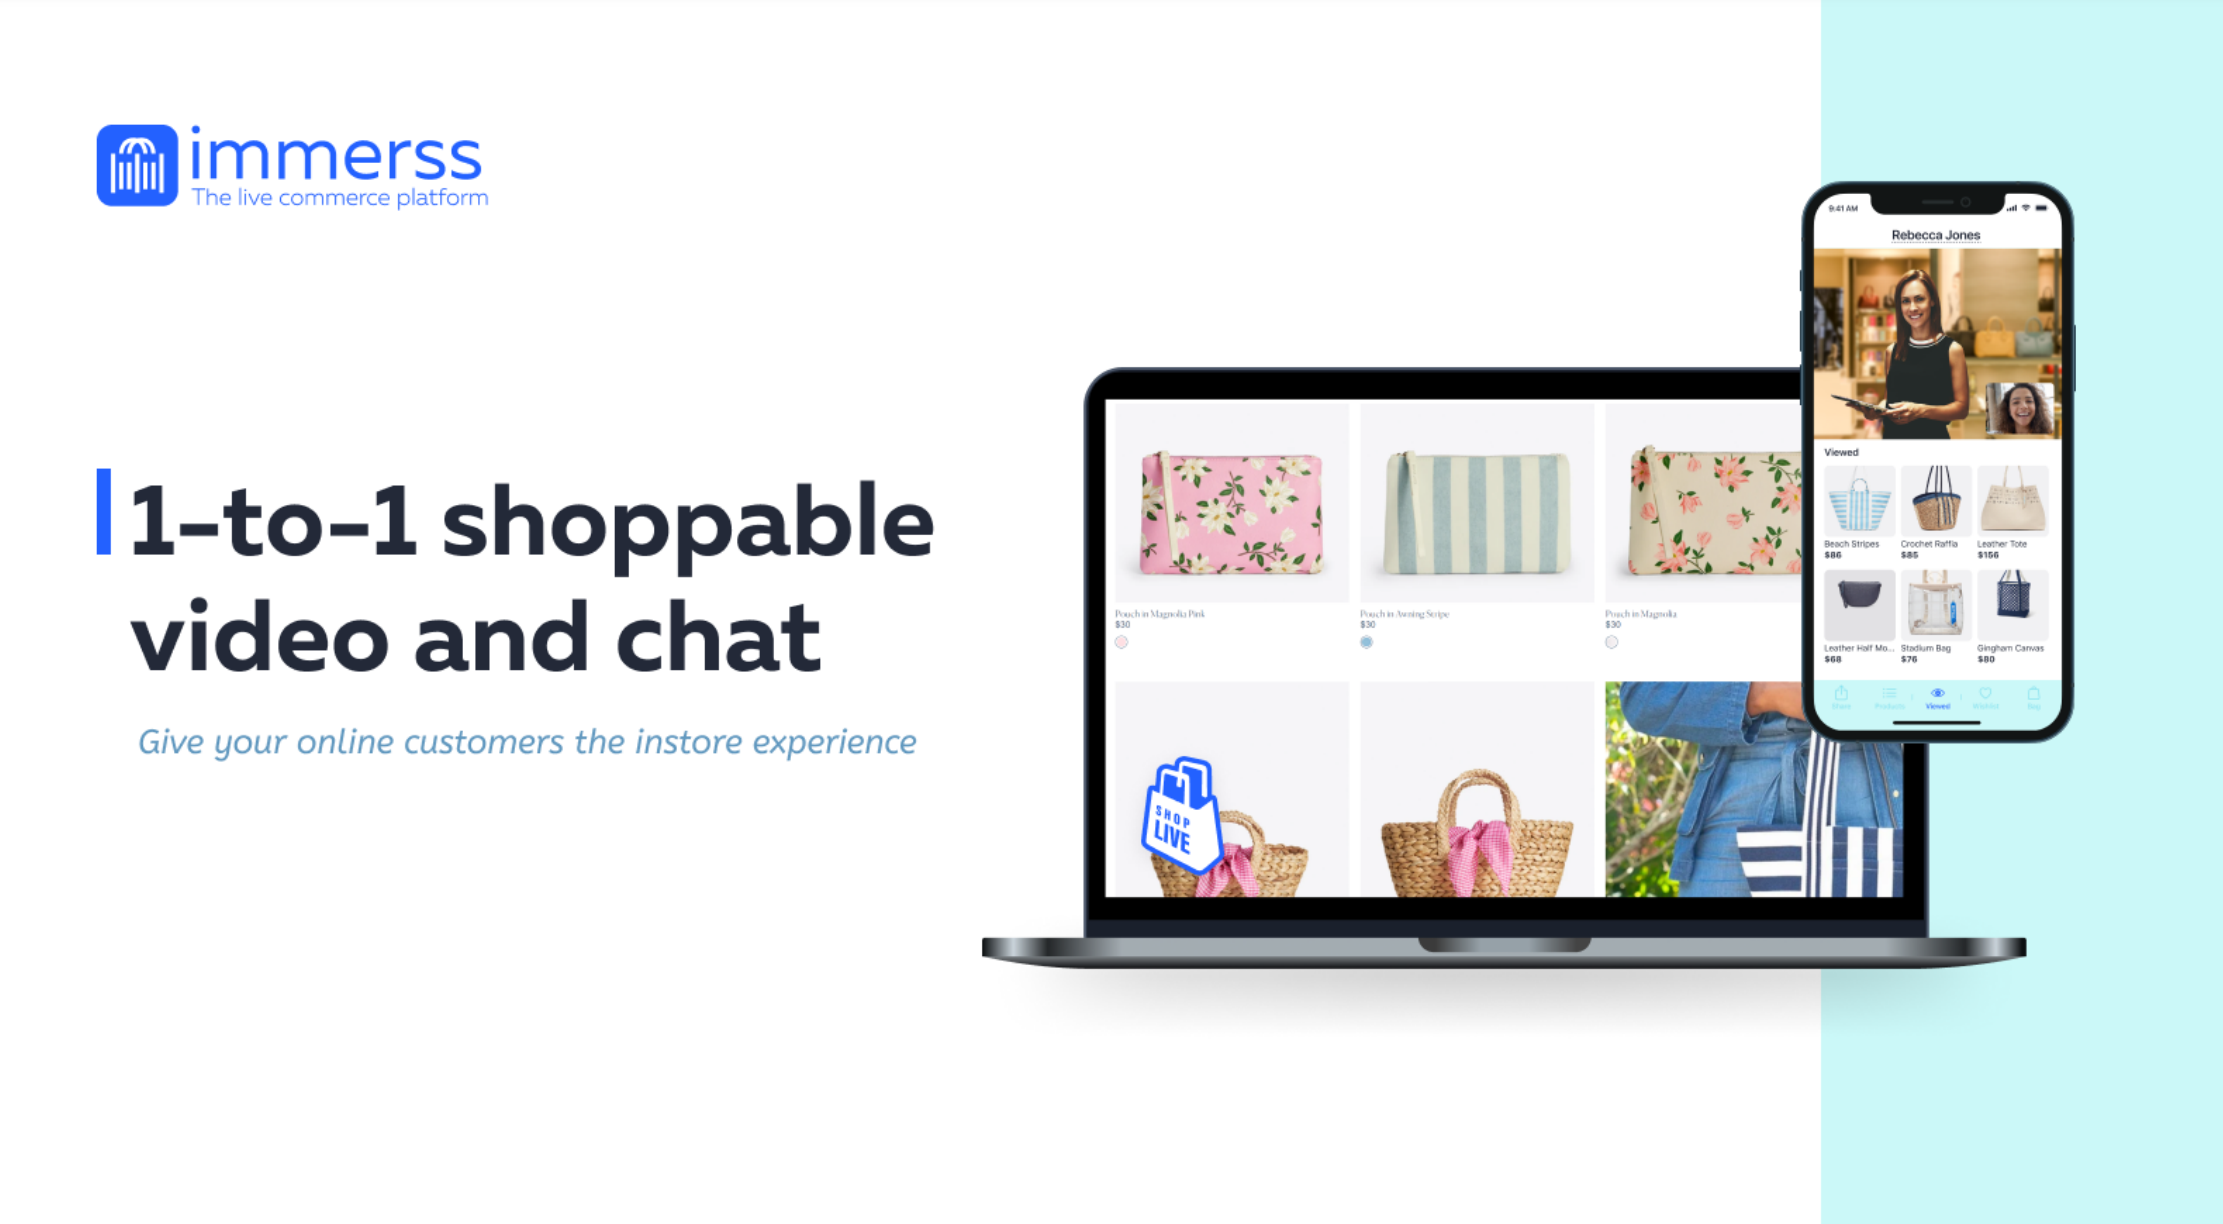 Live Video and chat Co-Shopping: Provide an in-store level of service to online shoppers